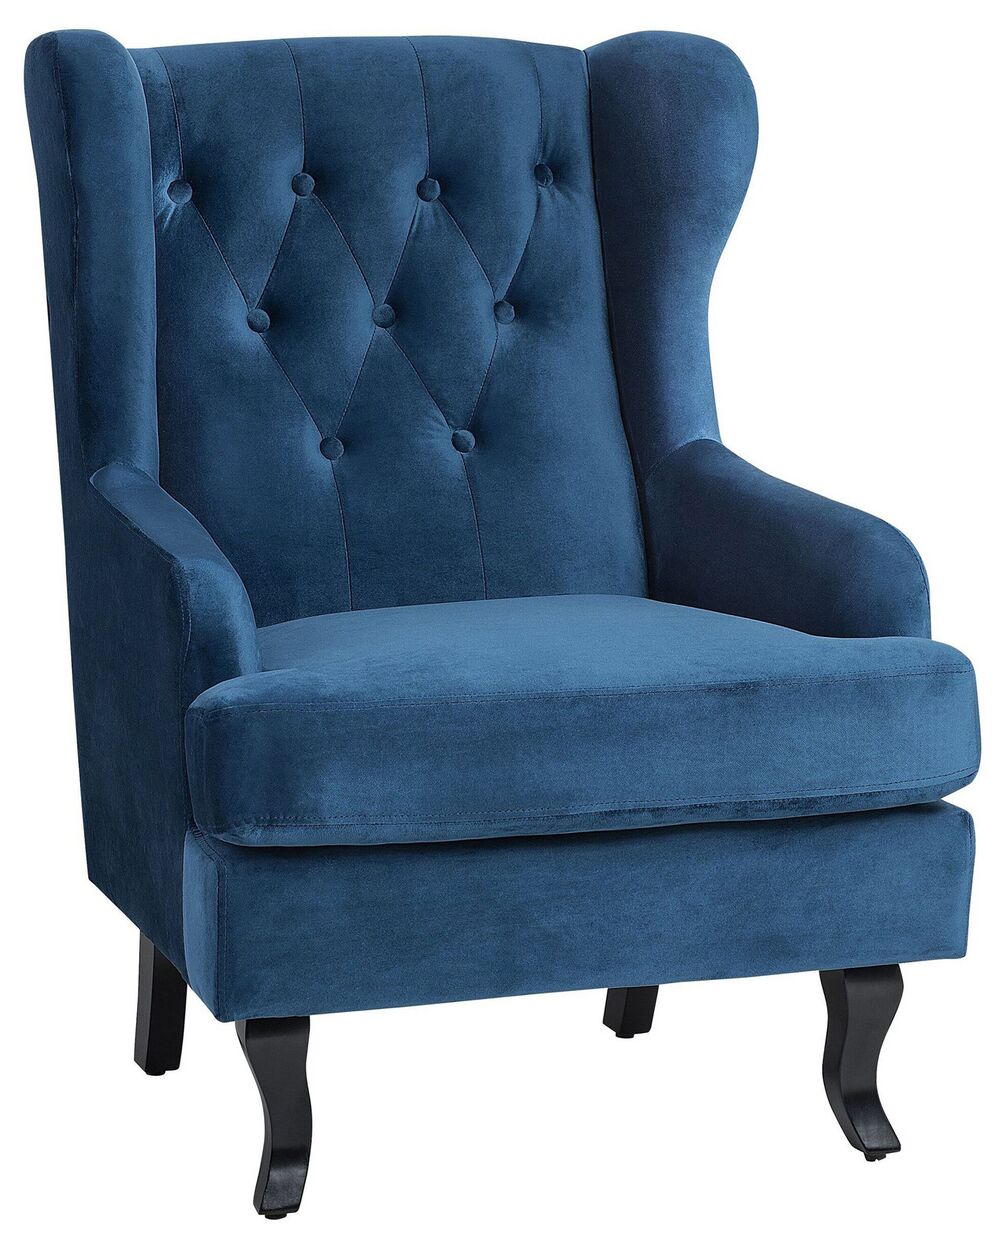 Teddy Fabric Wingback Chair with Soft Padded Cozy Armchair